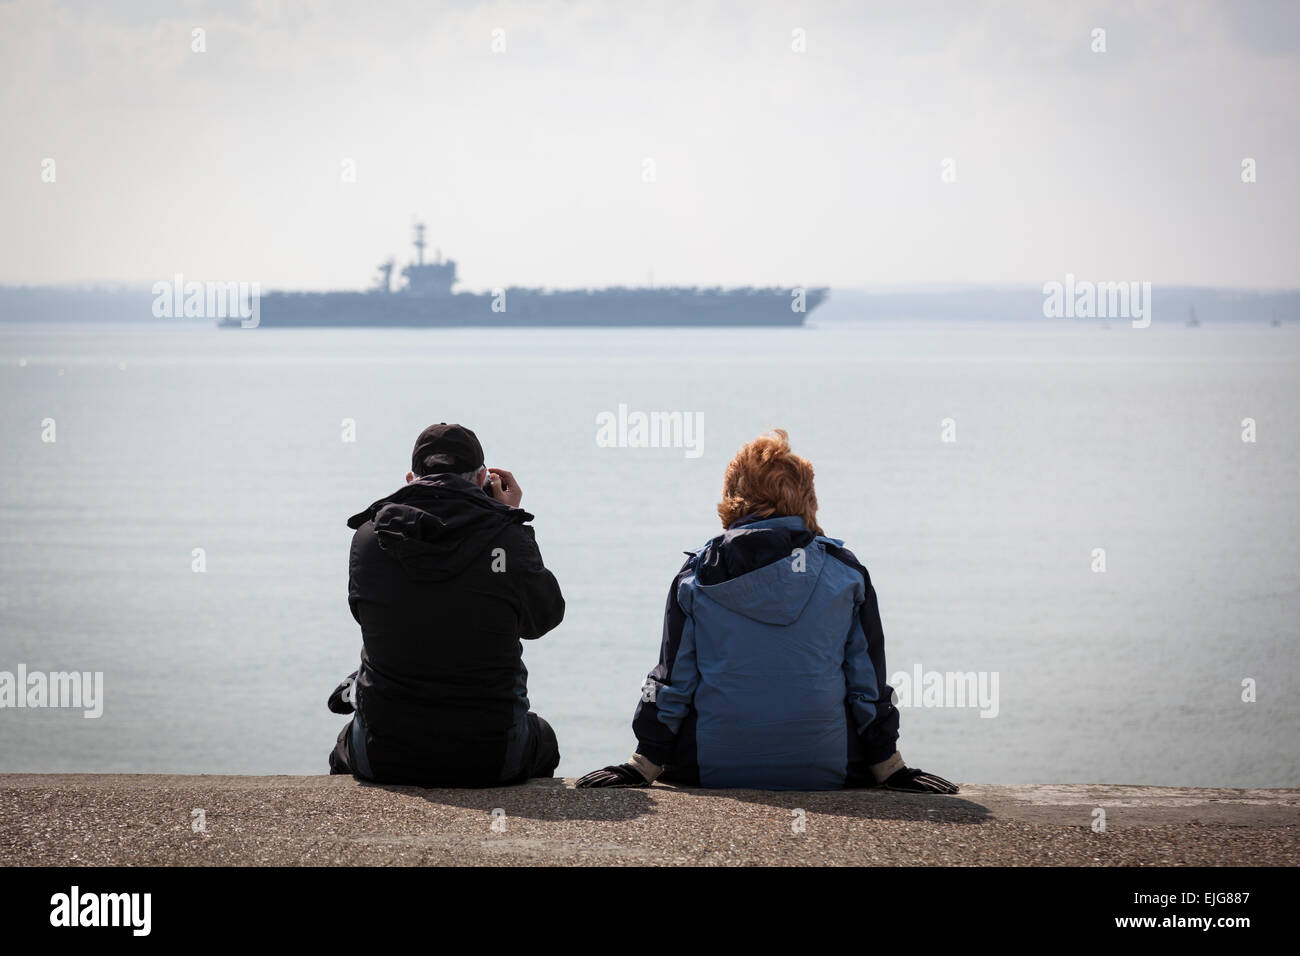 Stokes Bay, Solent, UK. 25th March, 2015. A couple sit on a concrete path at Stokes Bay whilst the man photographs the Nimitz class aircraft carrier USS Theodore Roosevelt at anchor in the Solent, 25th March 2015. Credit:  Anthony Hatley/Alamy Live News Stock Photo